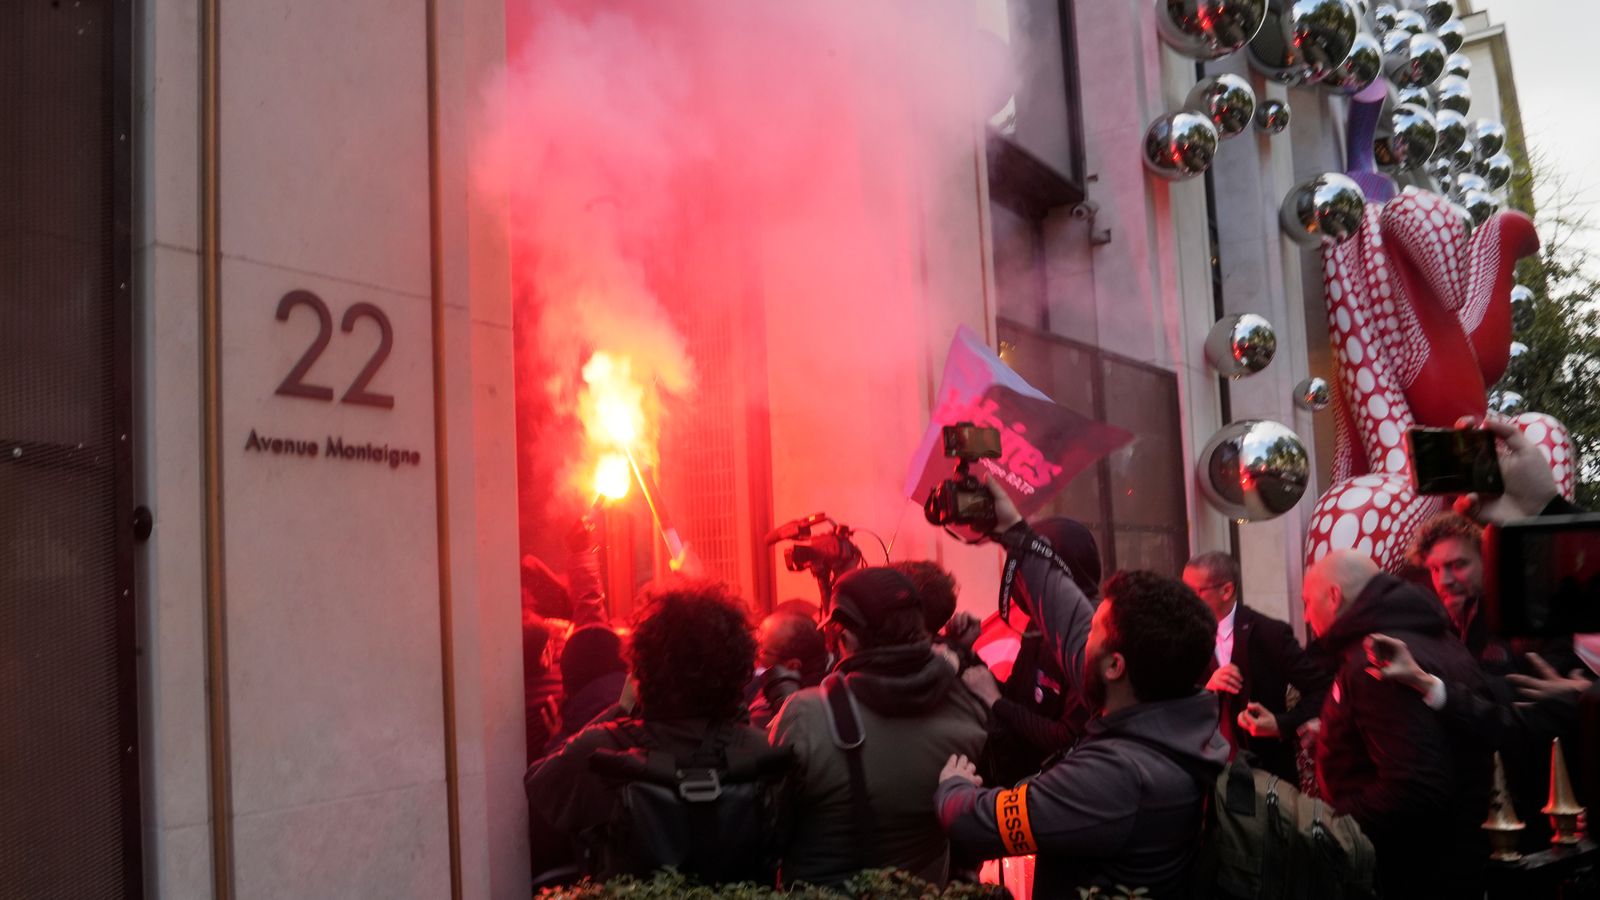 Railway workers invade Louis Vuitton HQ  as protests erupt across France on eve of decision on retirement age